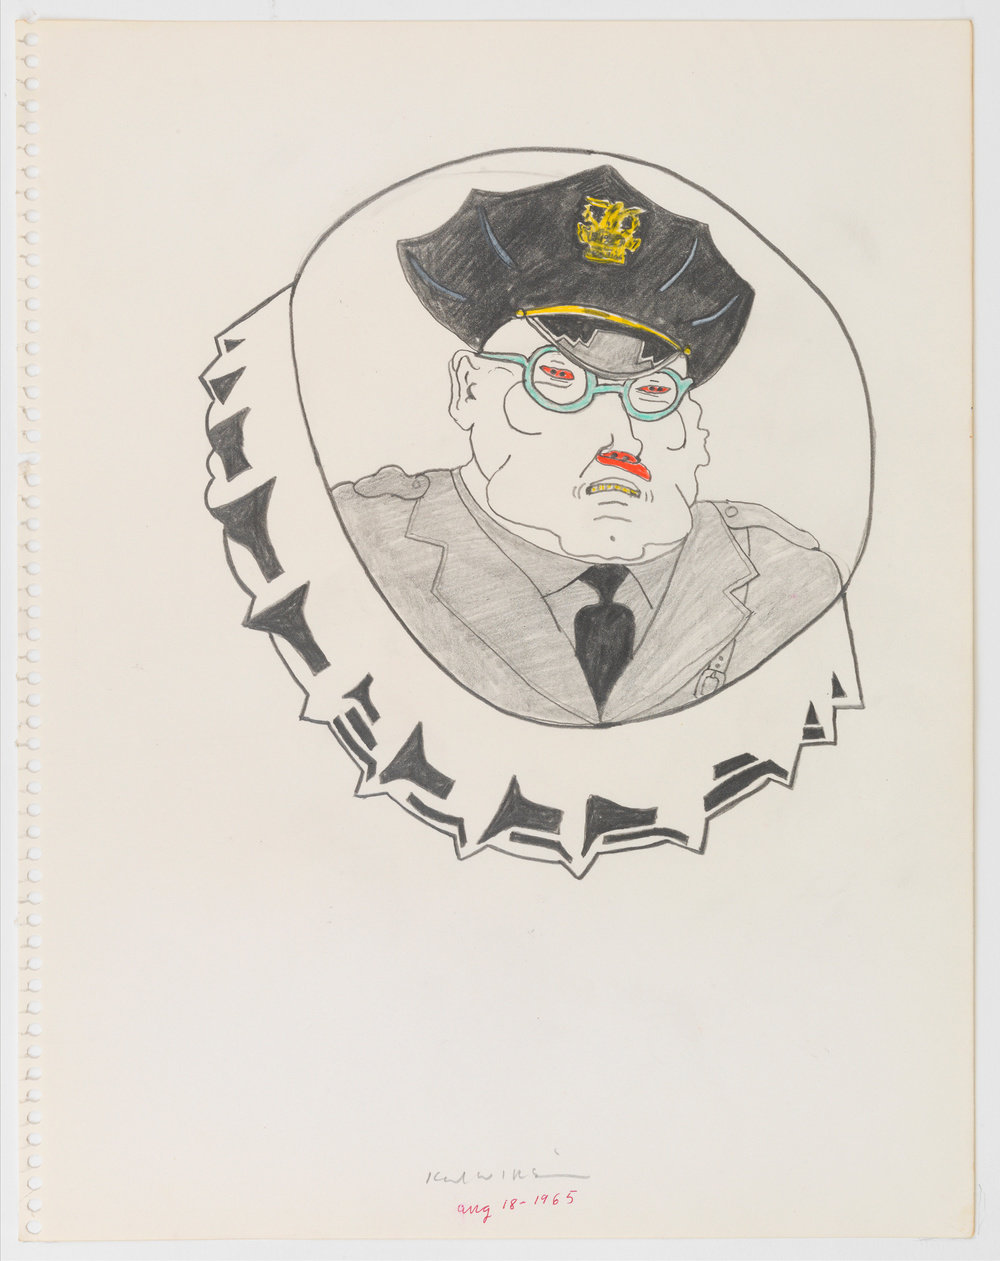 A graphite and color pencil on paper drawing by Karl Wirsum that depicts a male police officer on the face of a bottle cap. 